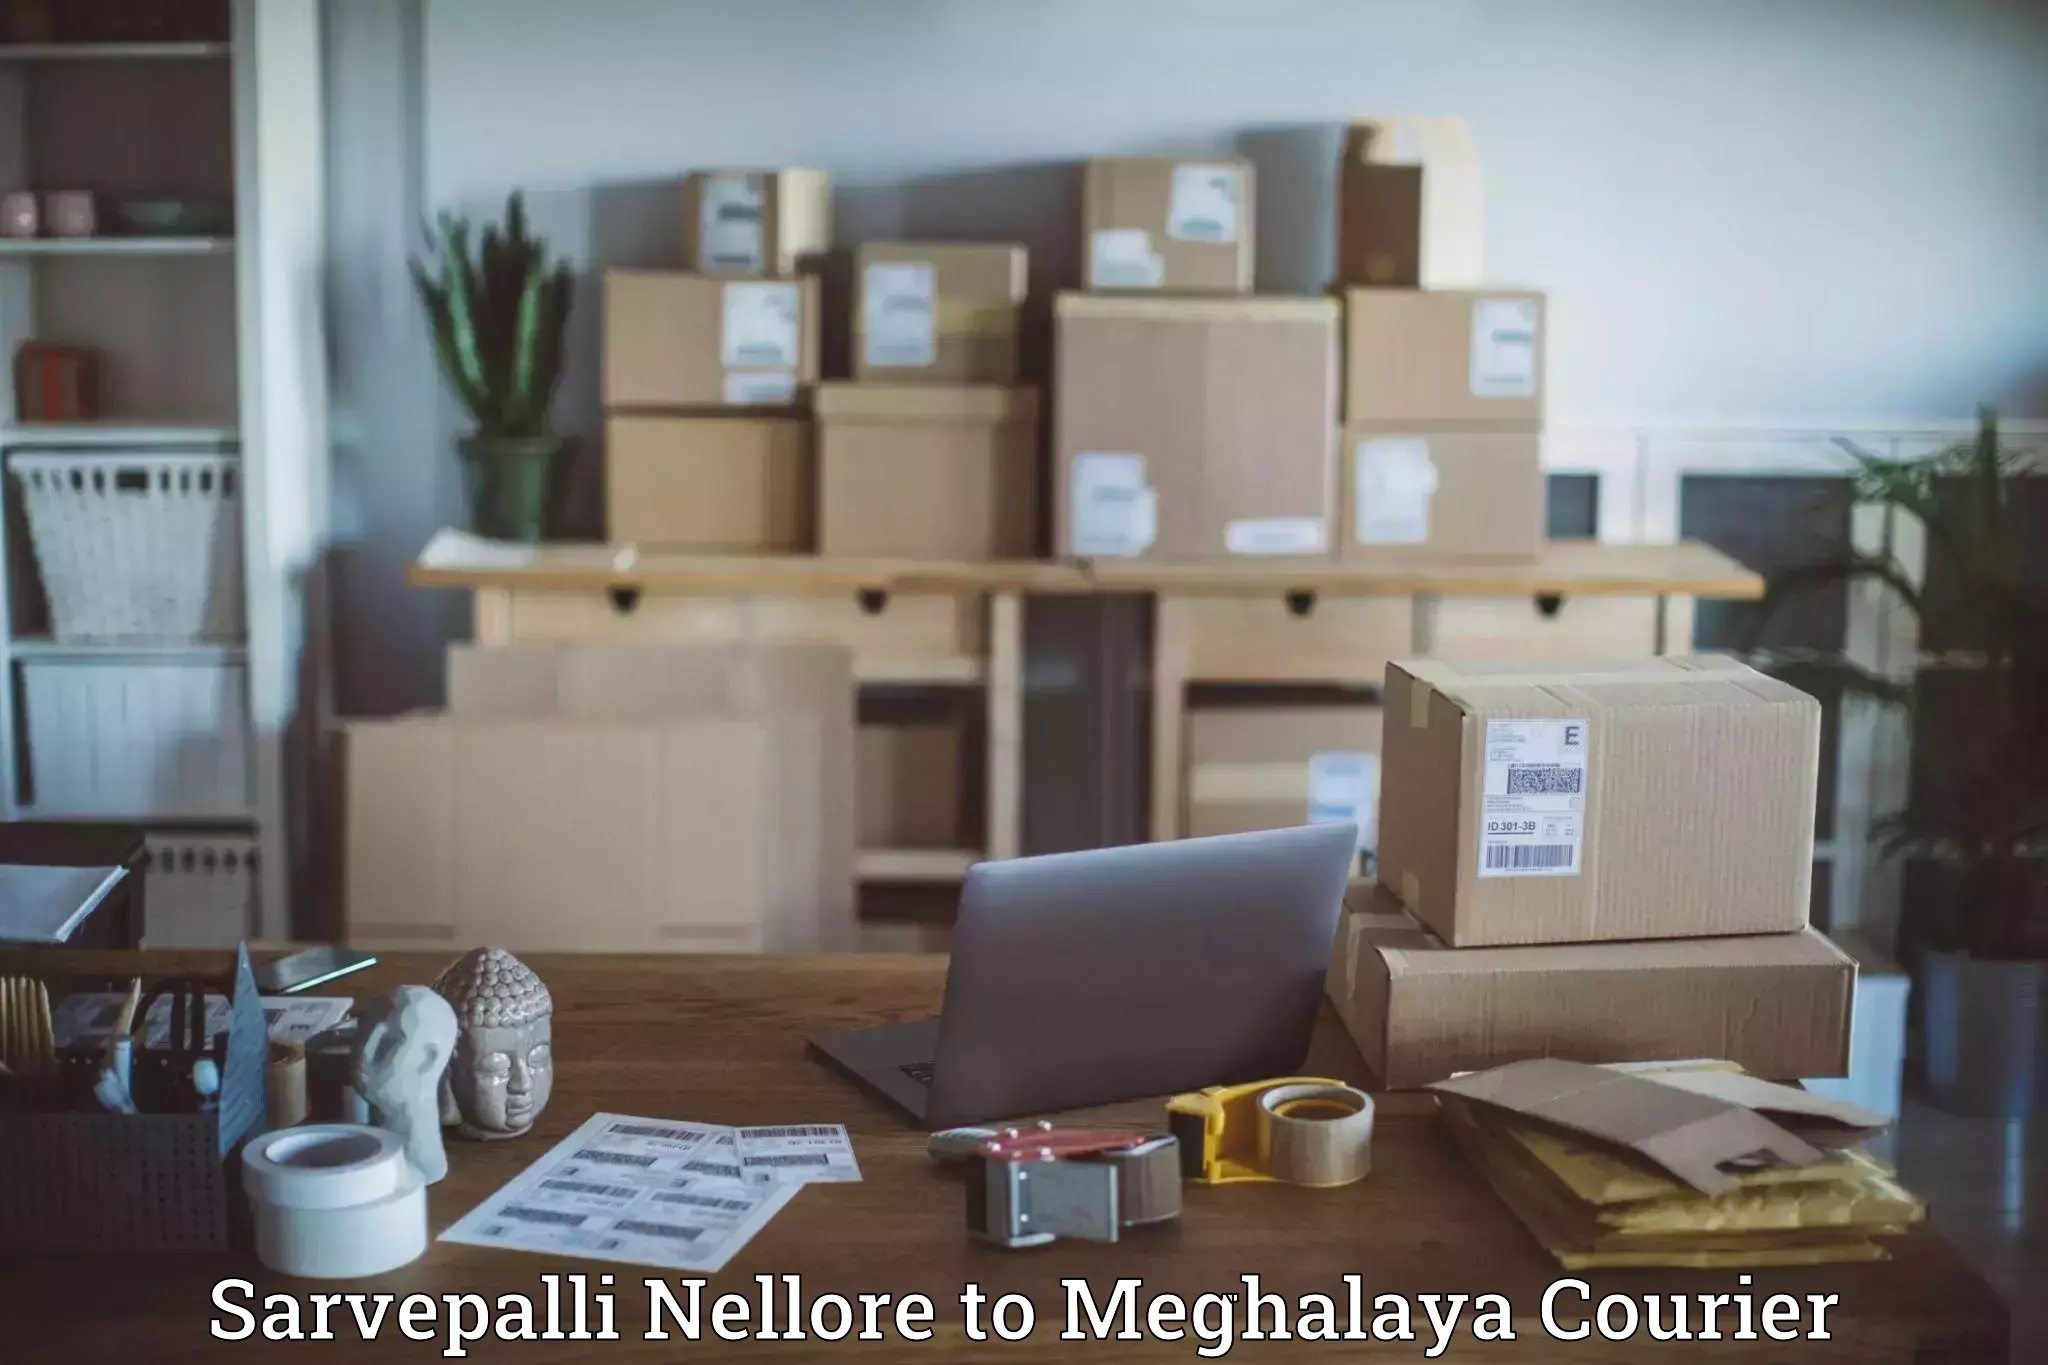 Secure package delivery Sarvepalli Nellore to Meghalaya